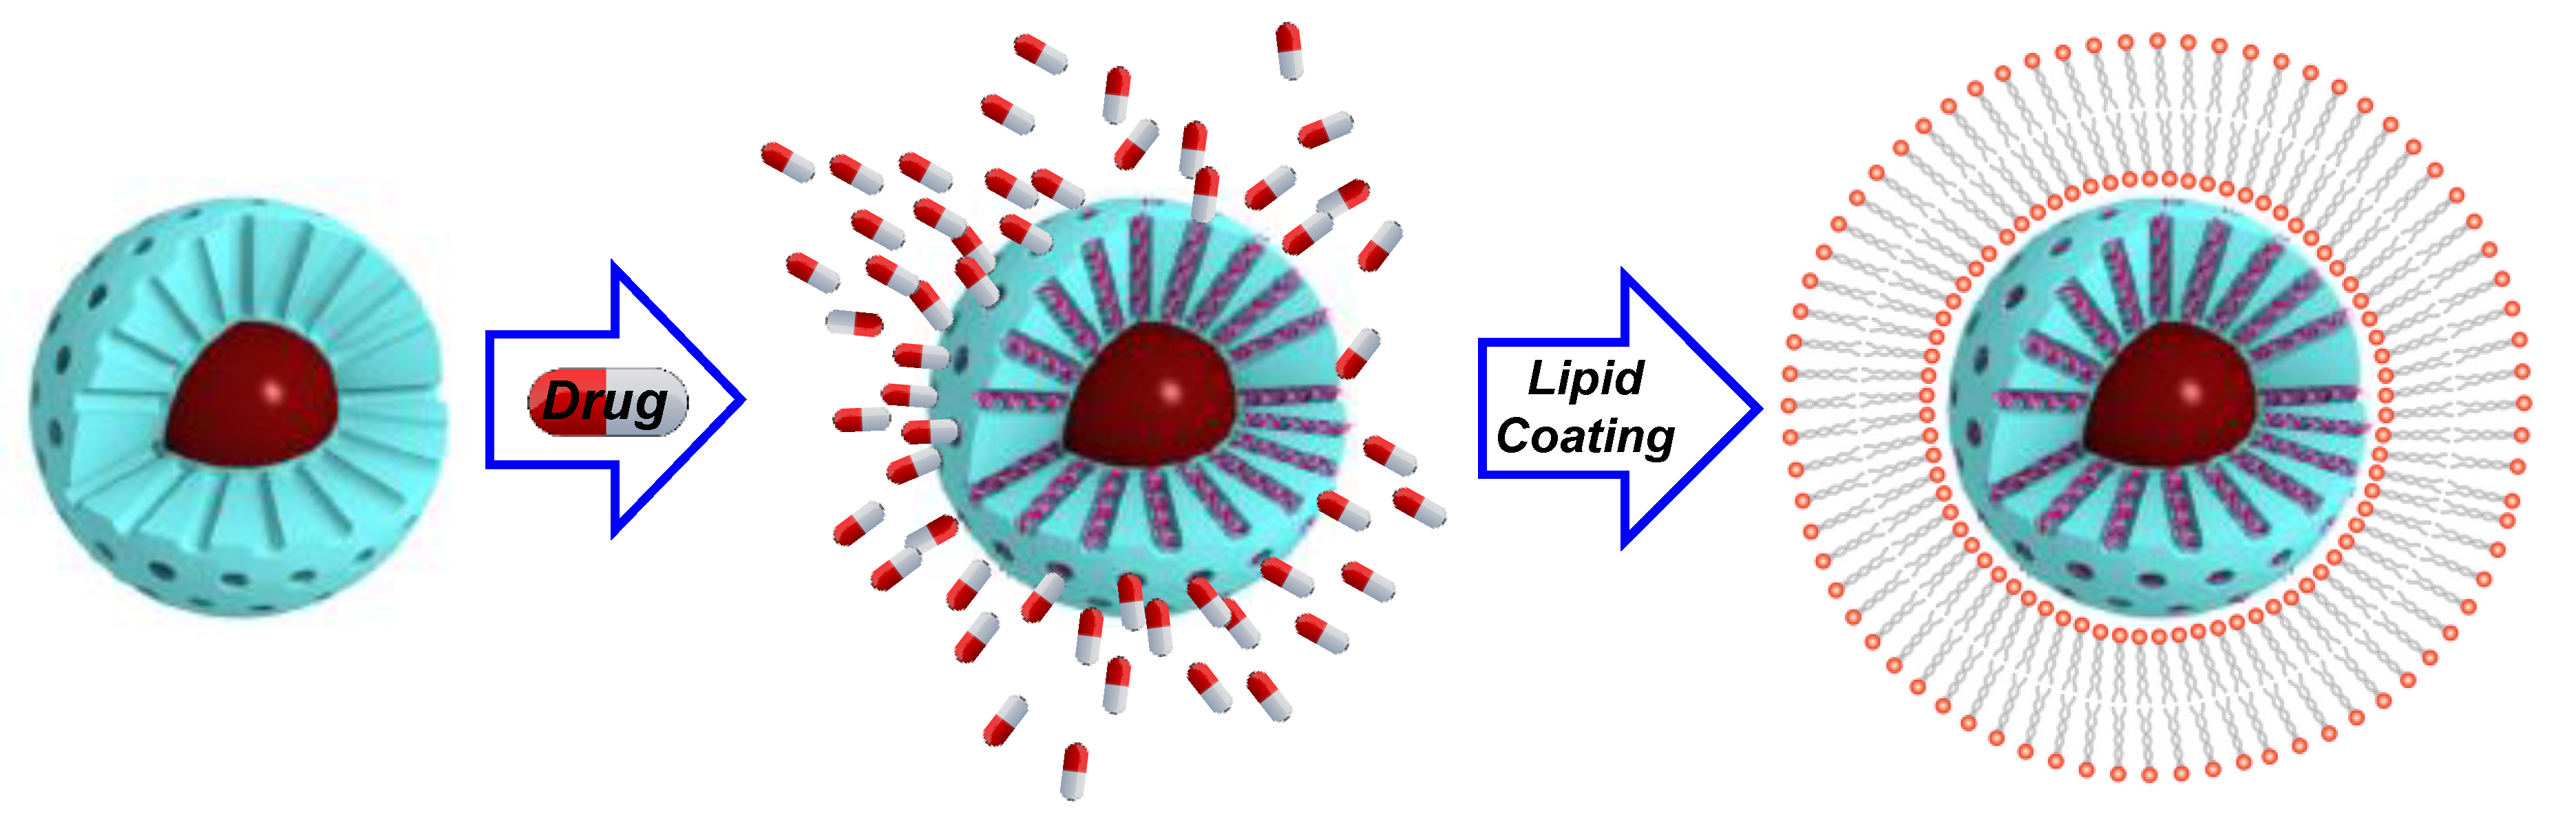 Mesoporous Silica Nanoparticles Modified Inside And Out For Onoff Ph ...